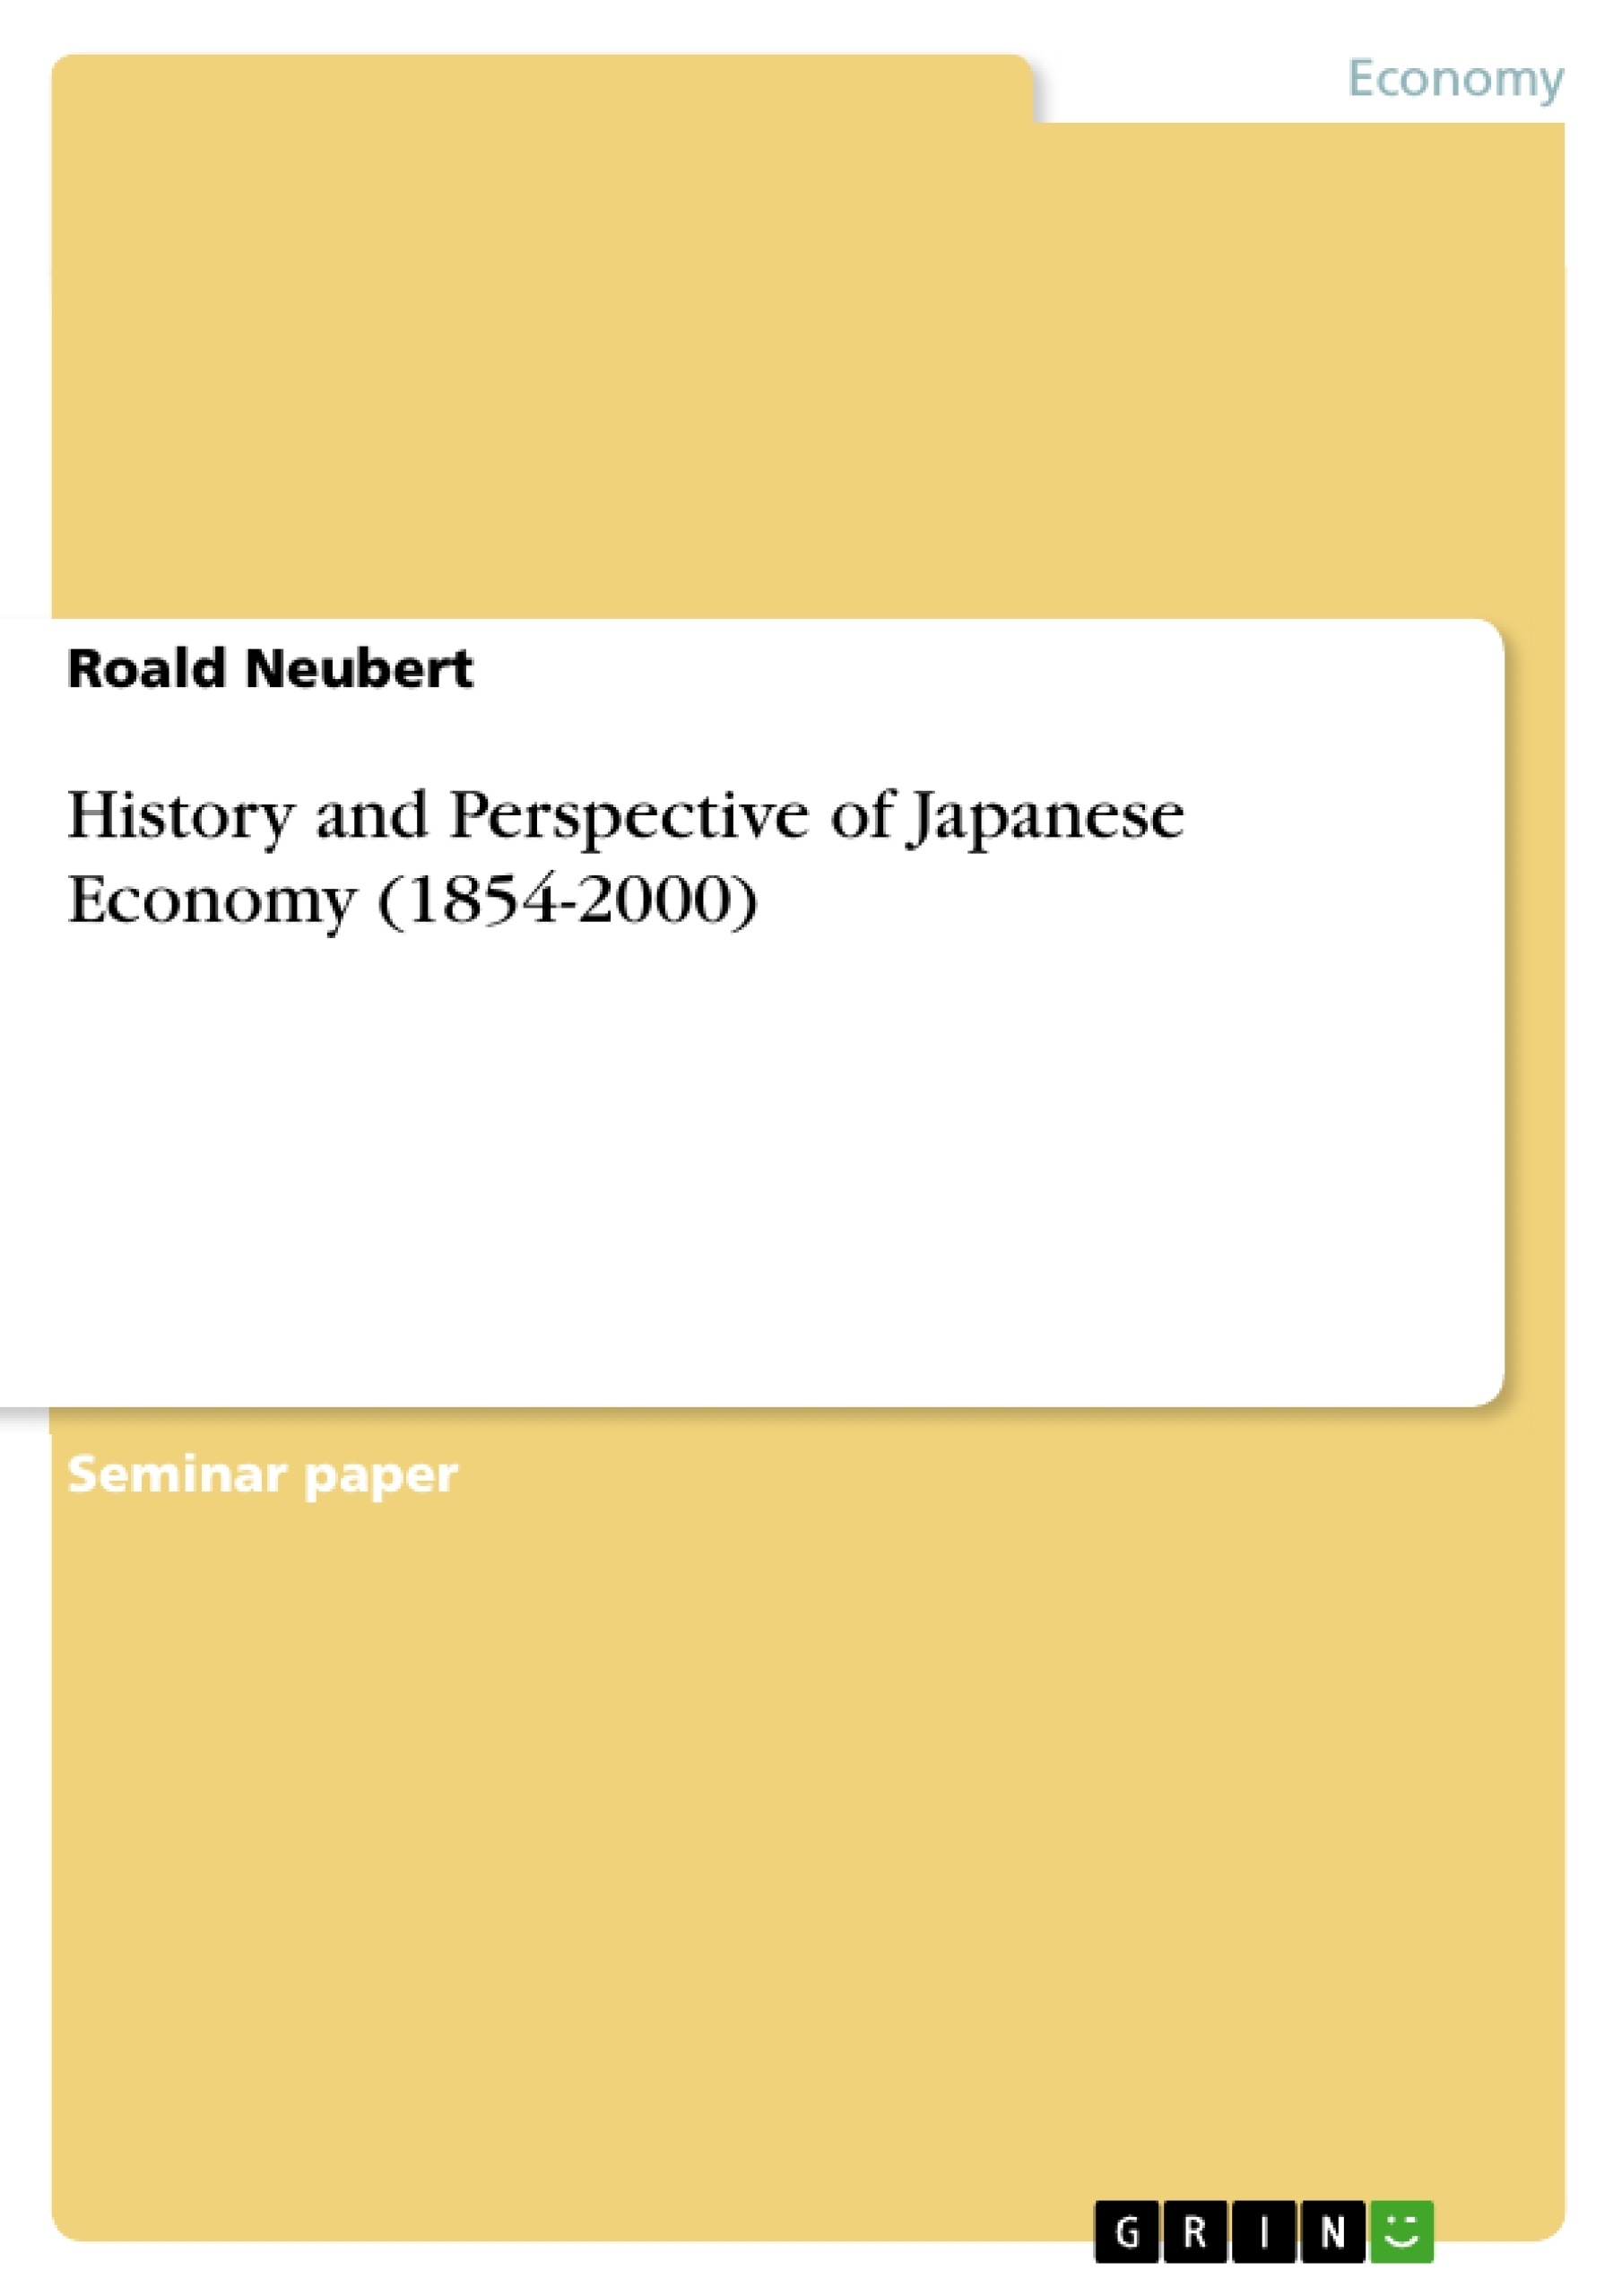 Título:  History and Perspective of Japanese Economy (1854-2000)